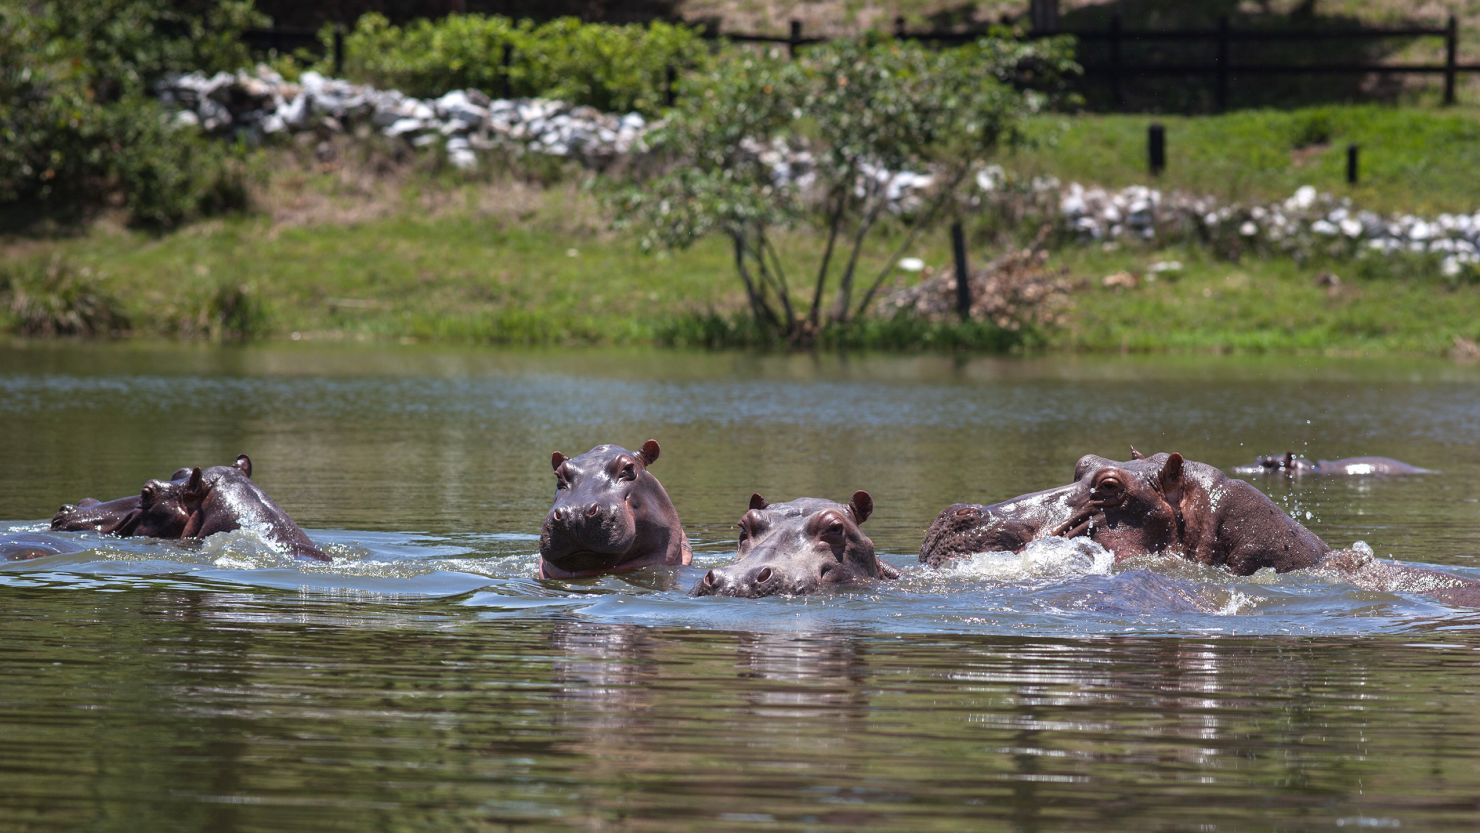 The hippopotamus population has grown steadily and the animals have become a hazard, the study argues.